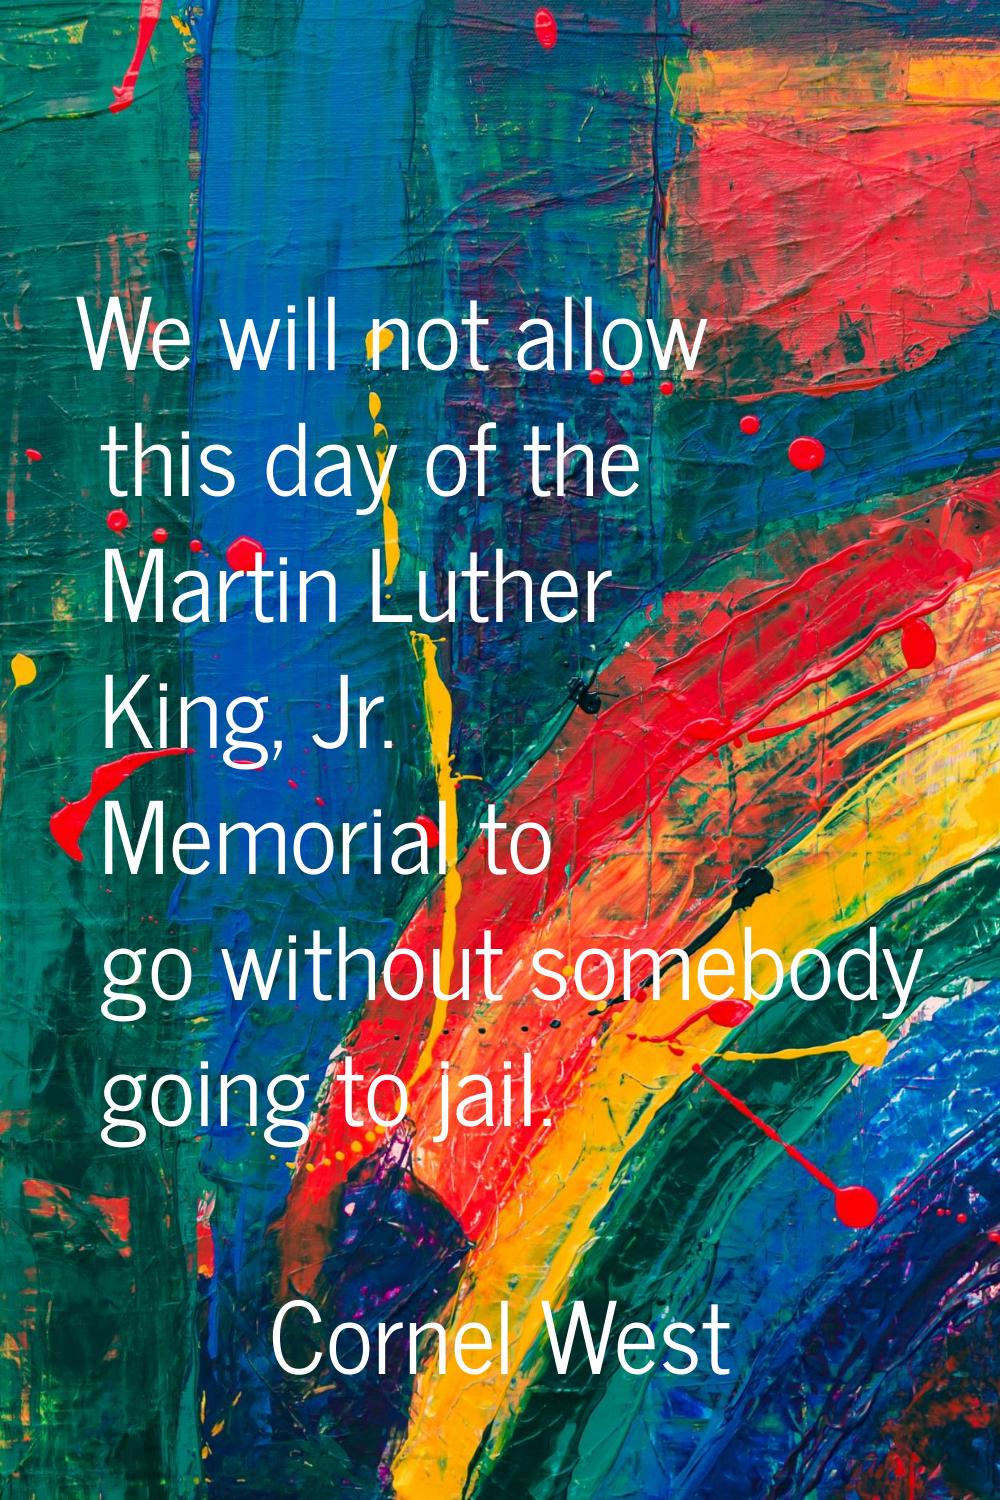 We will not allow this day of the Martin Luther King, Jr. Memorial to go without somebody going to 